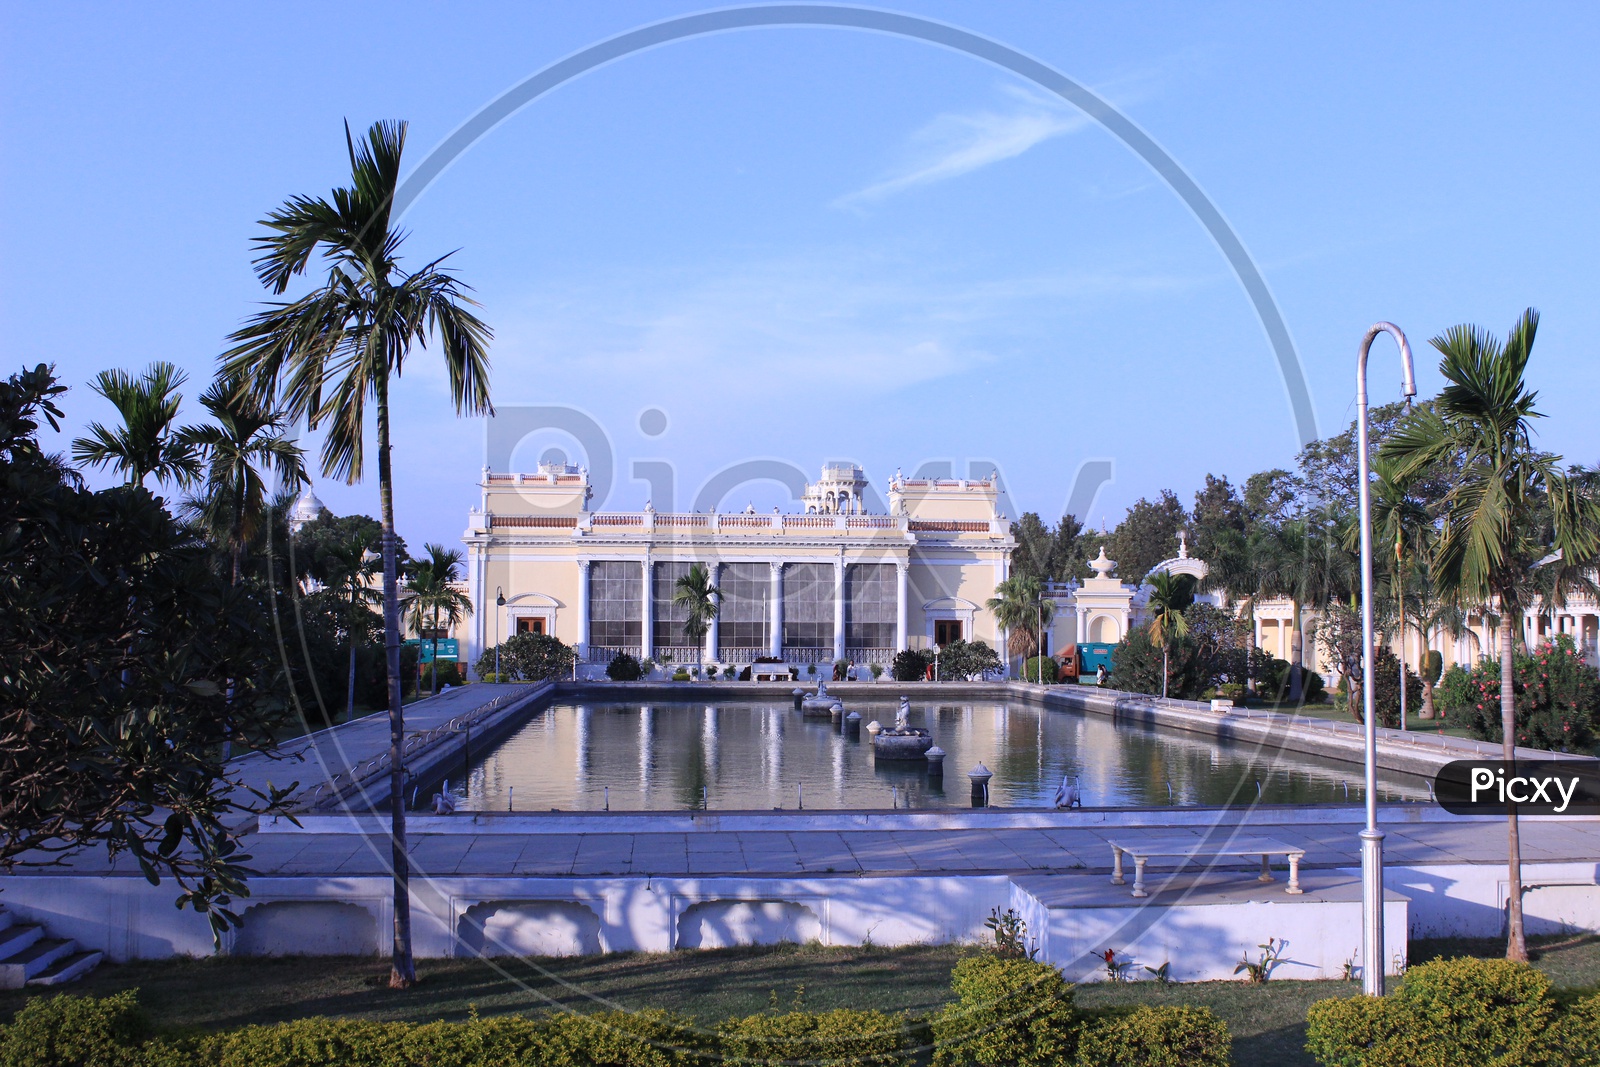 Chowmahalla Palace View With Blue Sky In Background